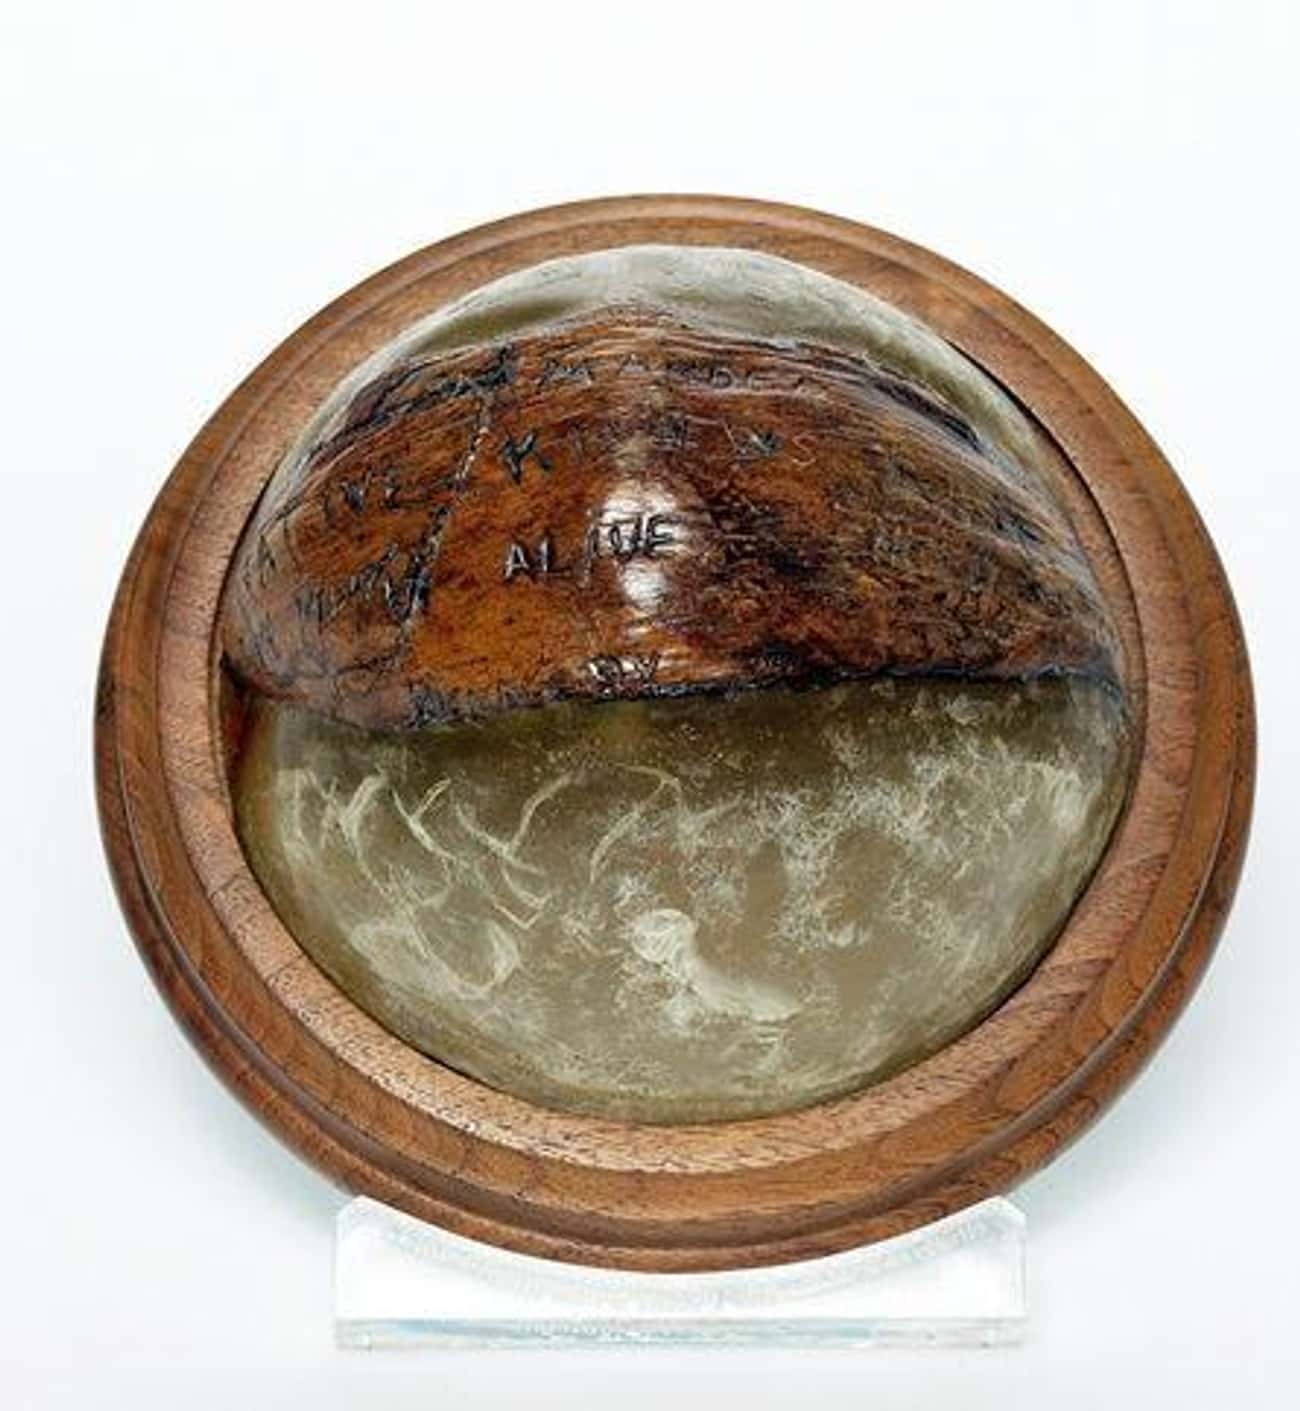 While Stranded, Lt. Kennedy Carved A Message Into A Coconut, Which He Later Used As A Paperweight